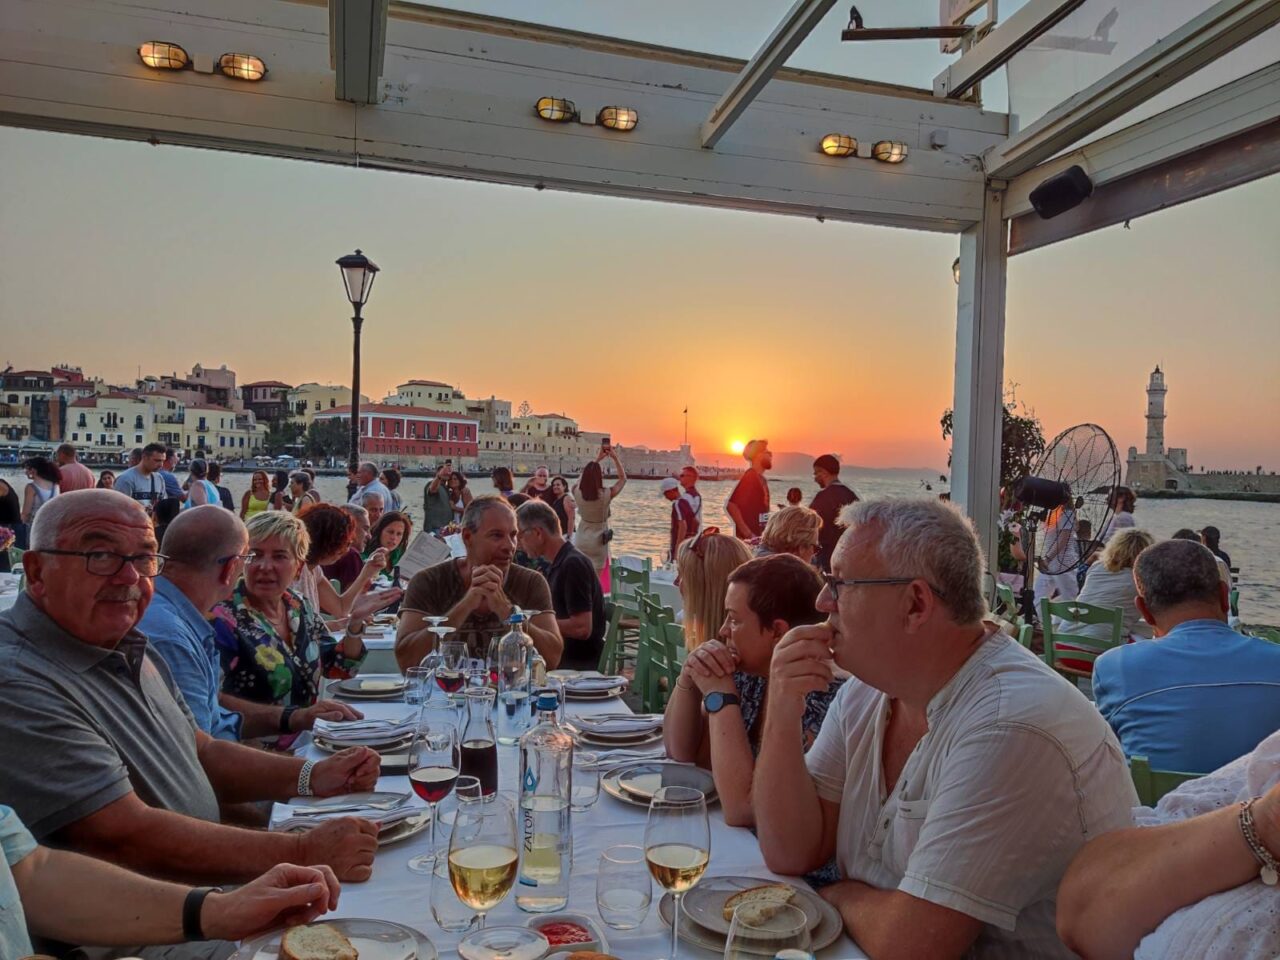 spring-and-autumn-flavours-of-crete-foodie-holidays-in-crete-for-singles-sunset-dinner-at-chania-old-harbor-with-solo-travellers-at-the-mistral-flavours-of-crete-week